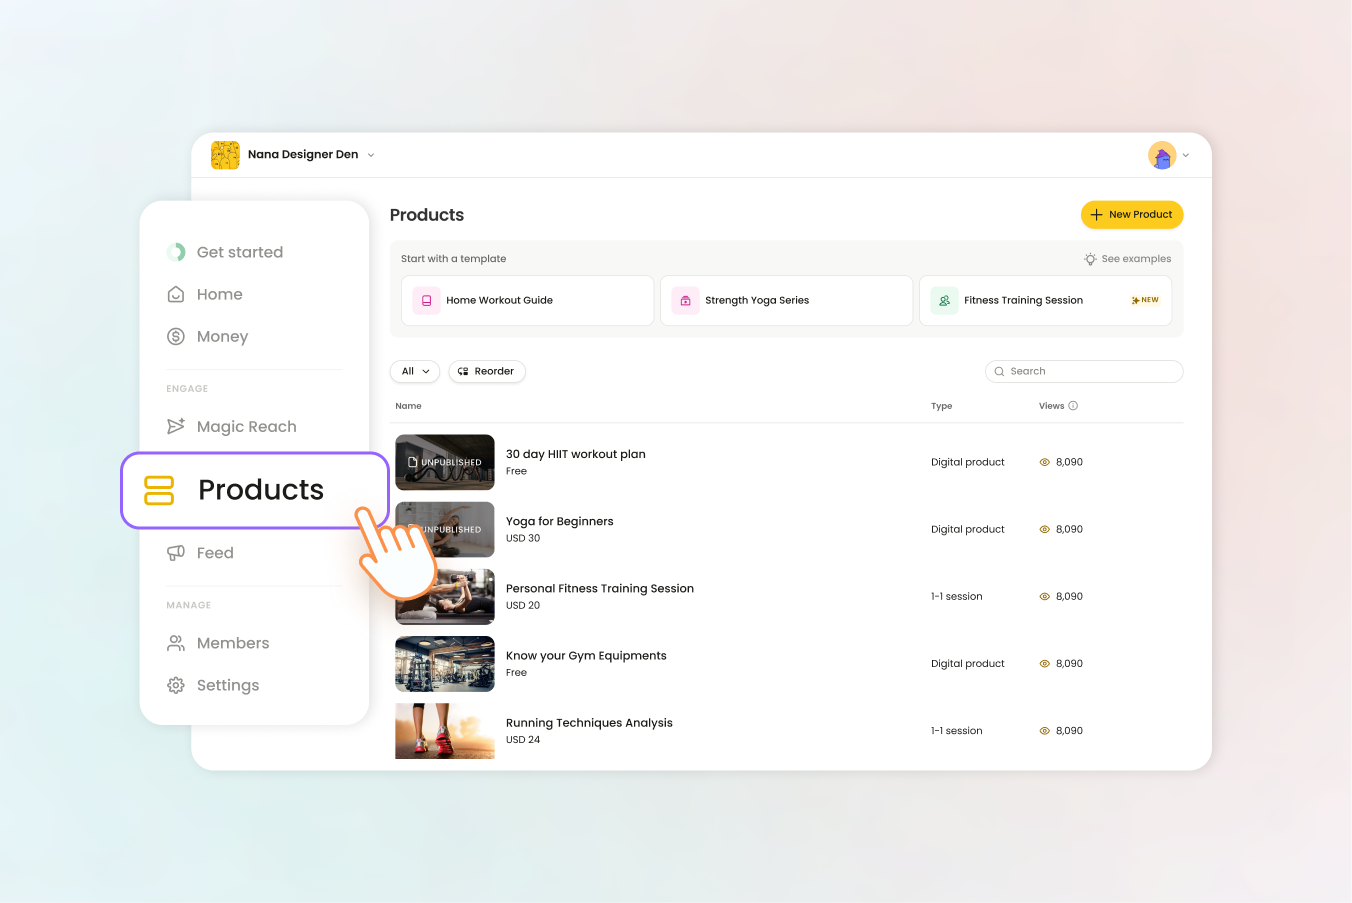 nas.io products section screenshot